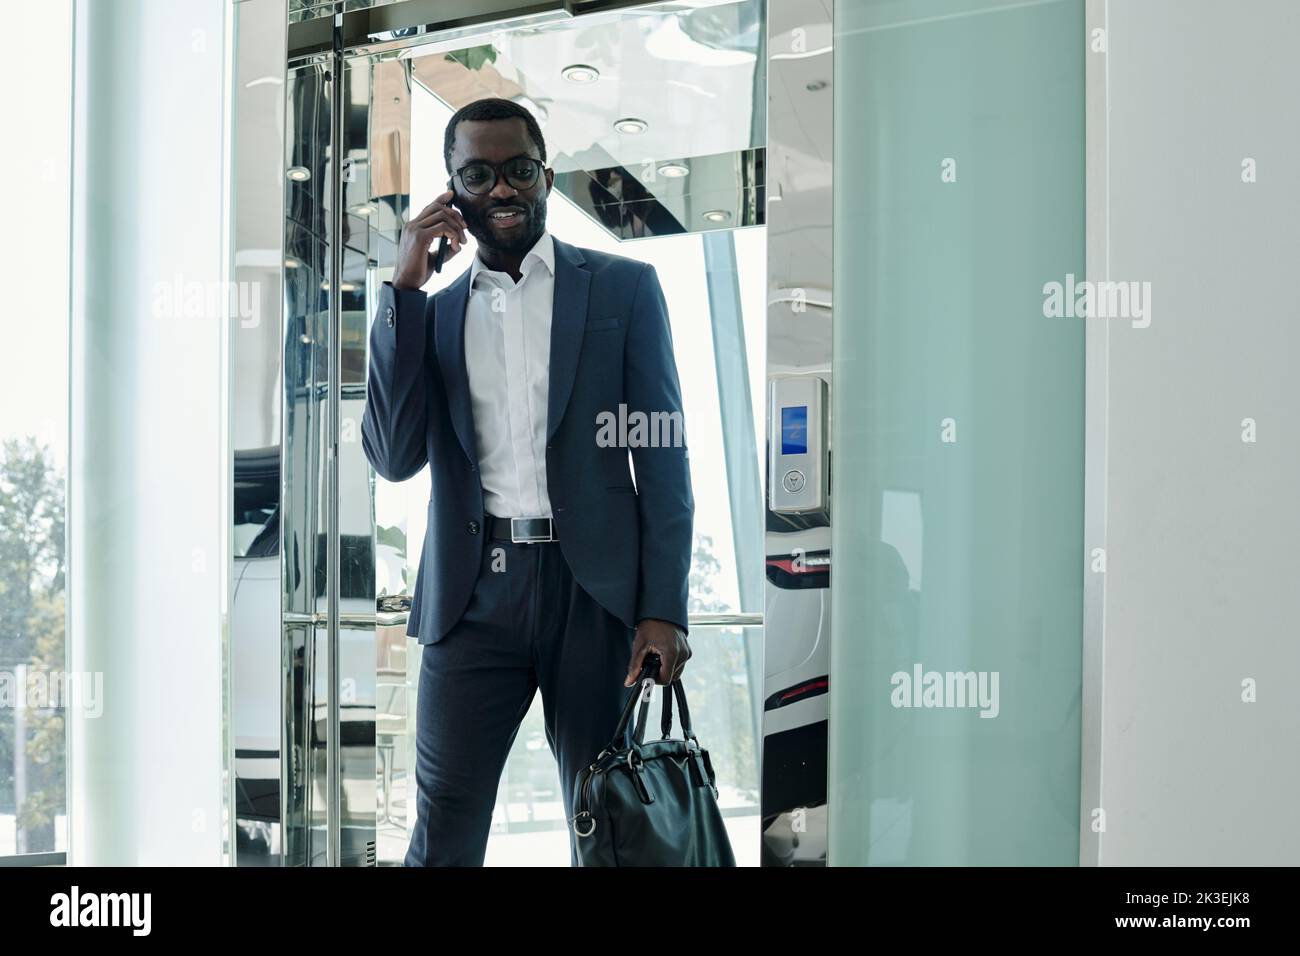 Confident African American businessman in elegant suit talking on smartphone while going out of elevator with transparent walls Stock Photo